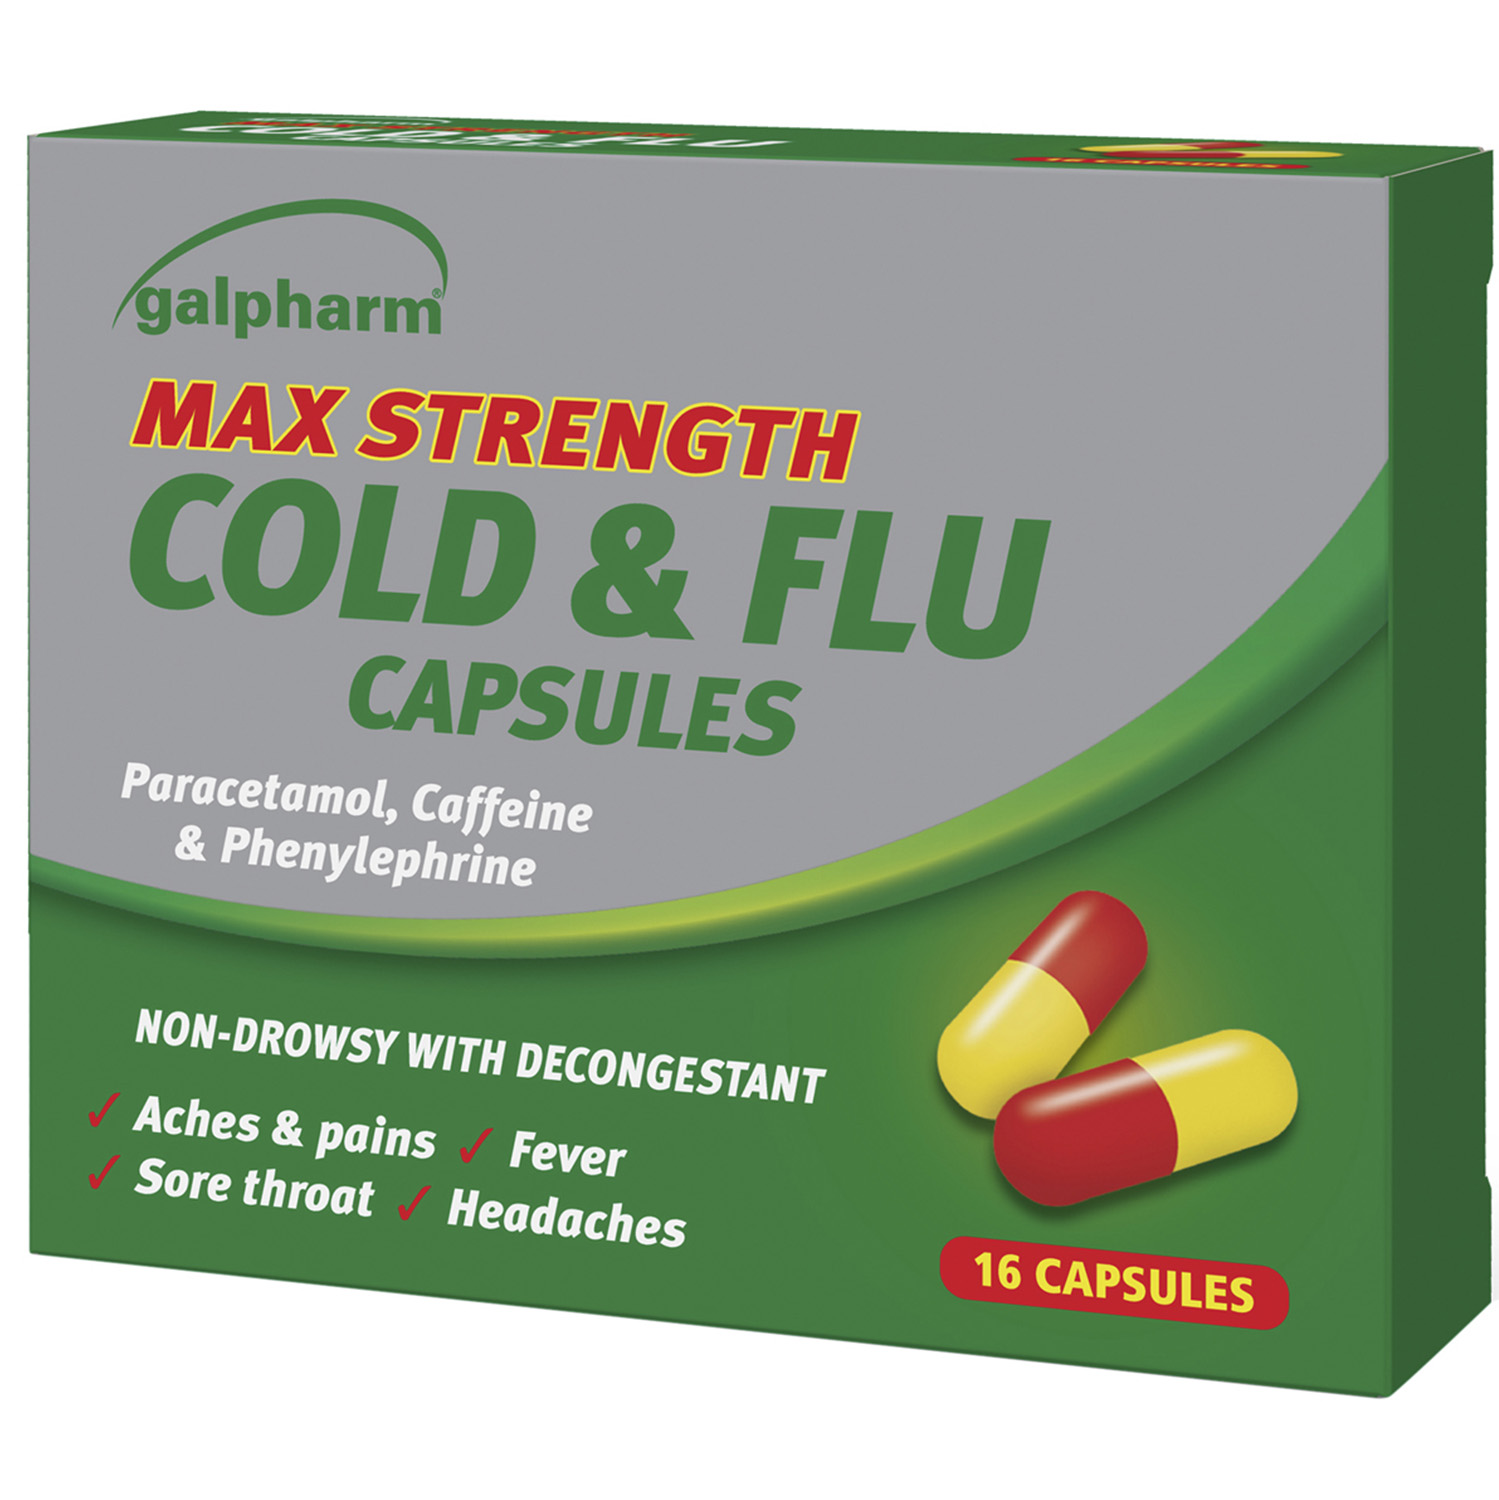 Galpharm Max Strength Cold & Flu Capsule 16 Pack Image